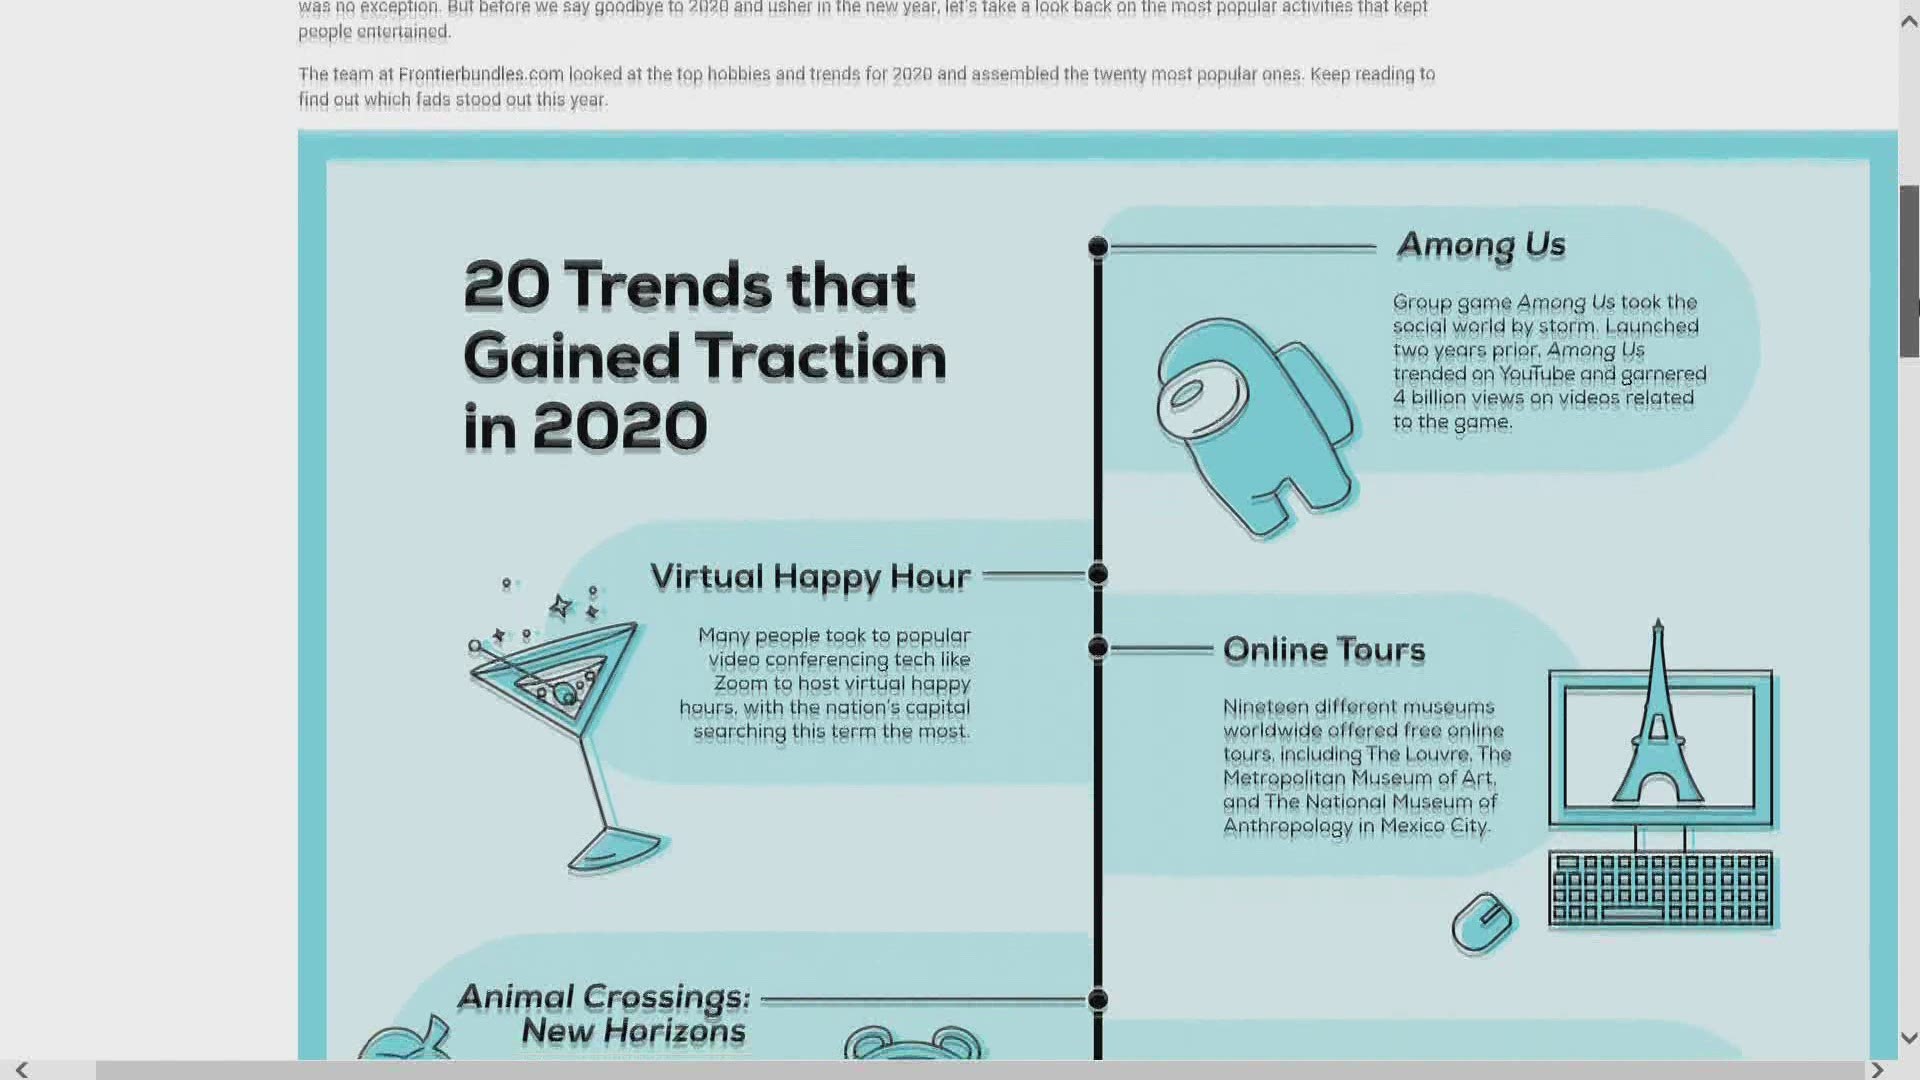 Among Us, virtual happy hours and online tours were some of the viral sensations in 2020